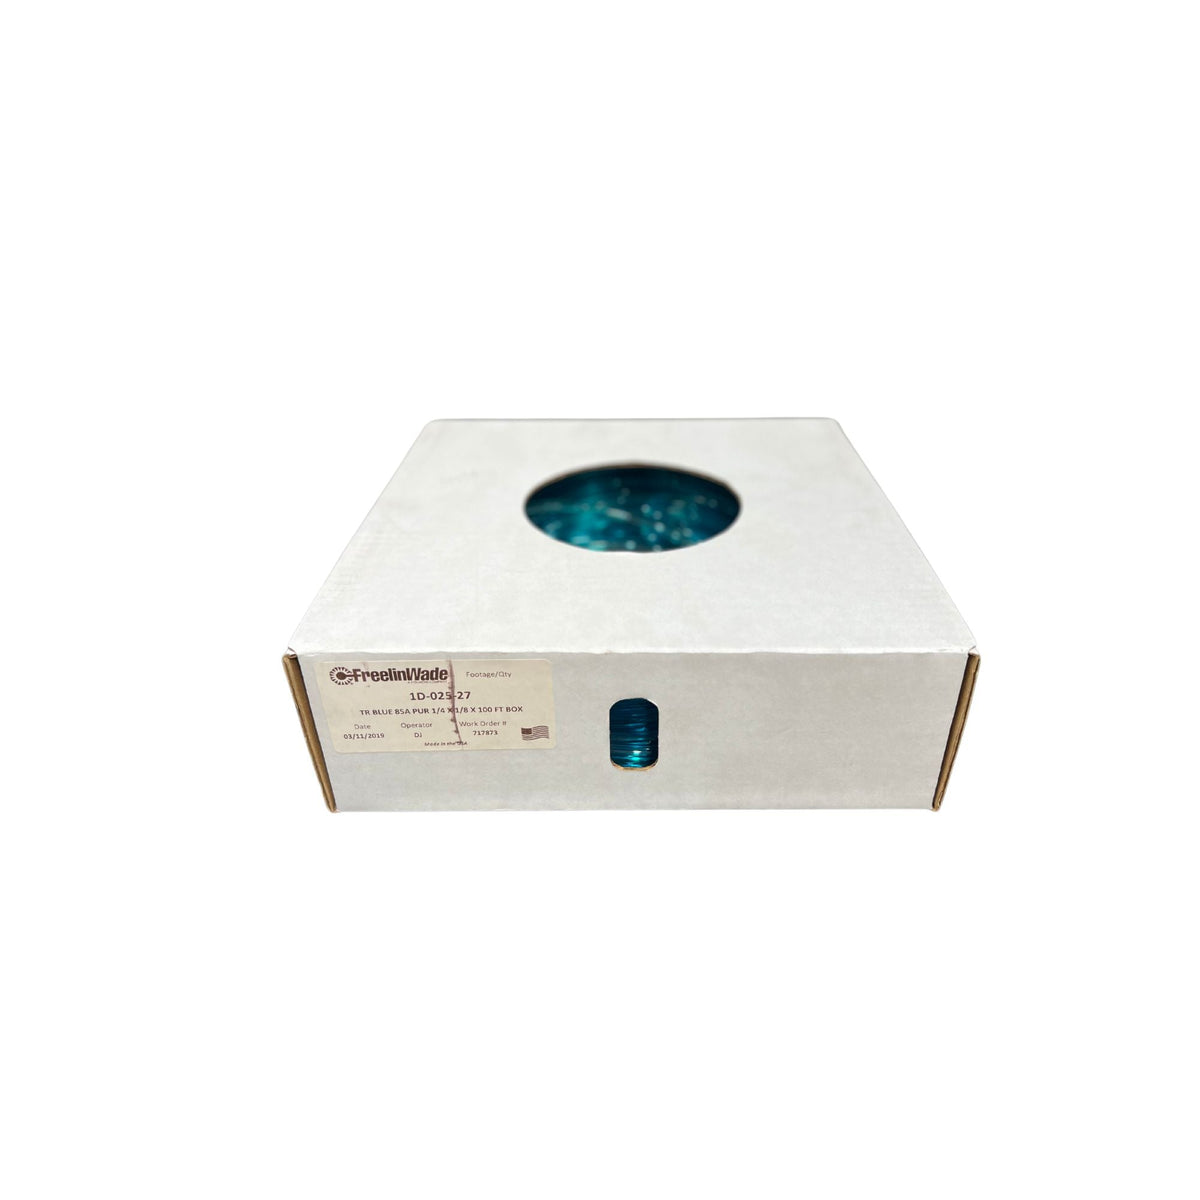 White cardboard box with circle and blue objects inside